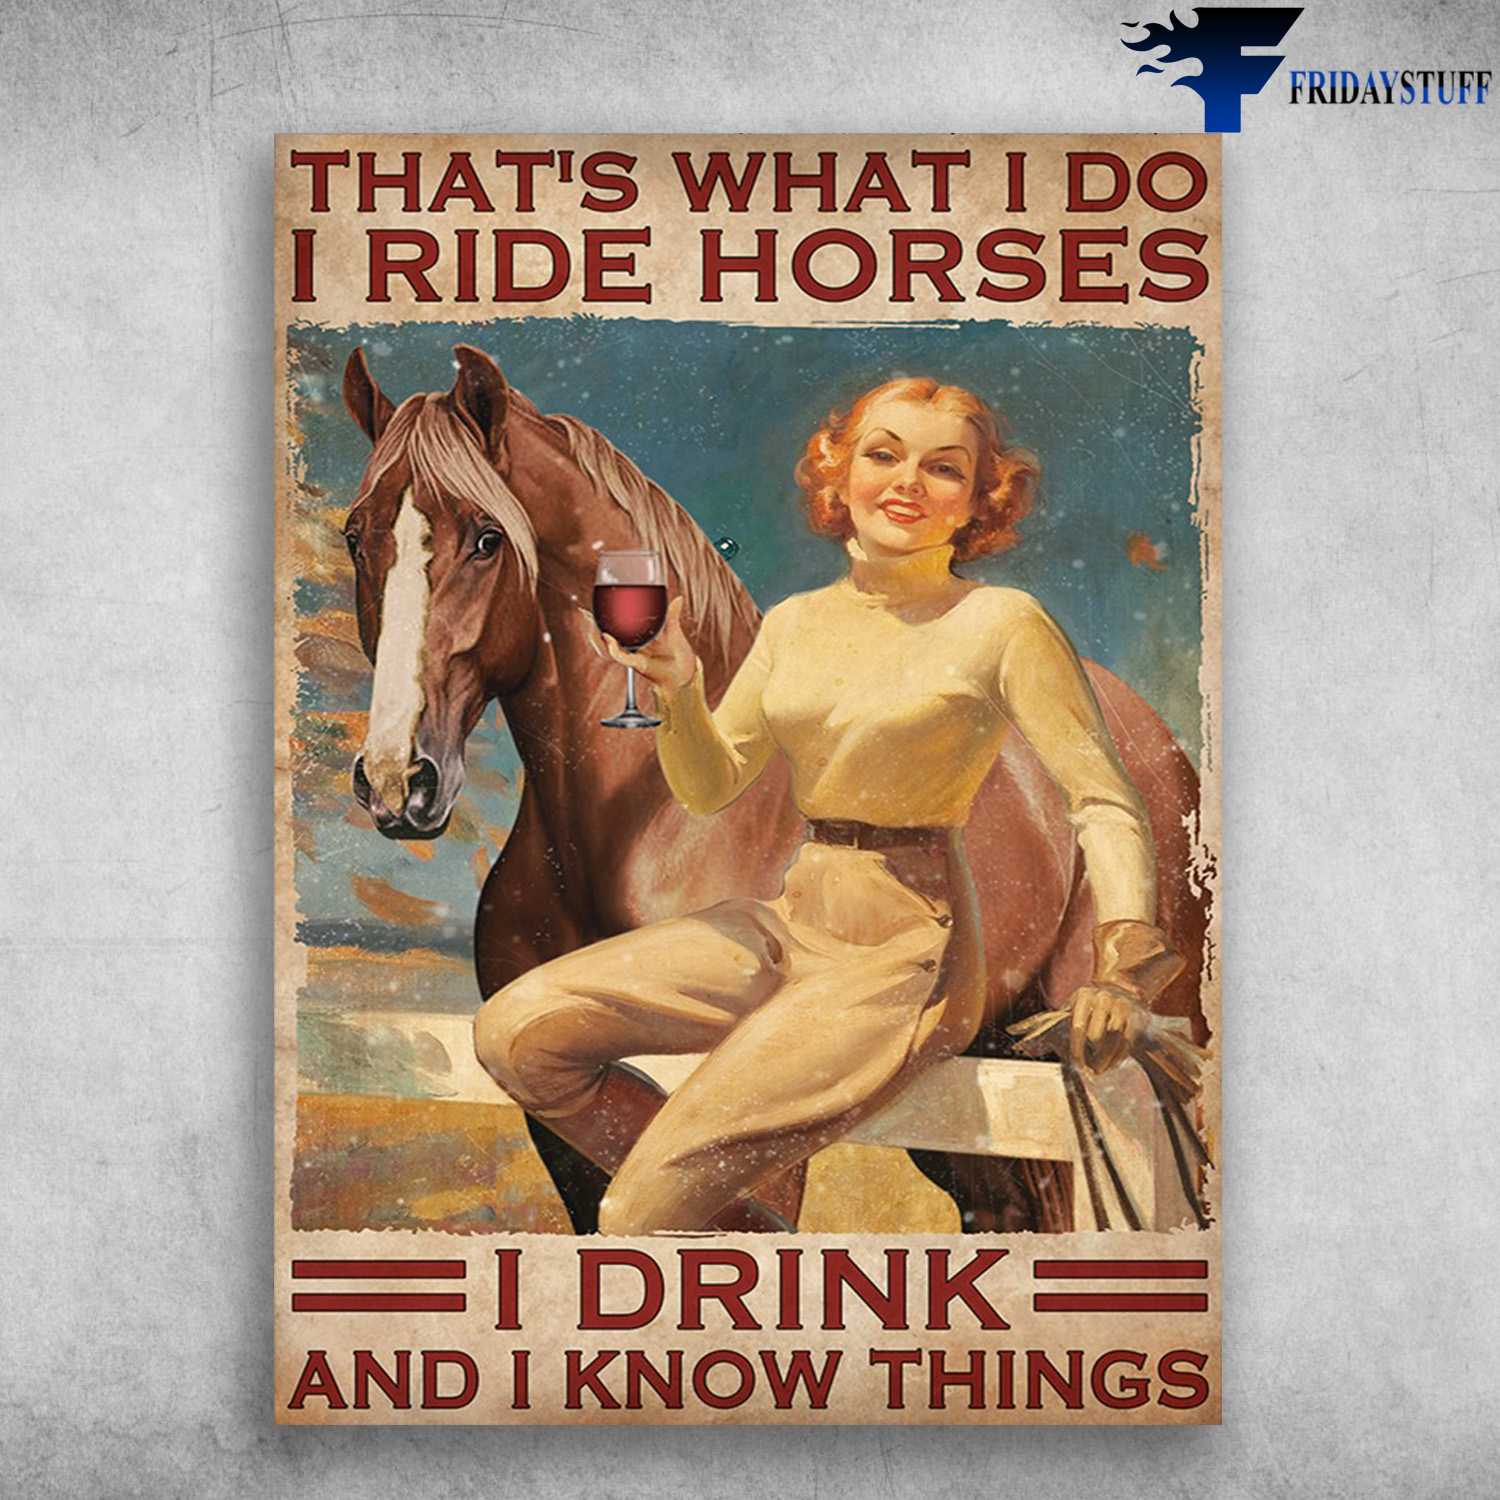 Lady And Horse, Wine Lover - That's What I Do, I Ride Horses, I Drink, And I Know Things